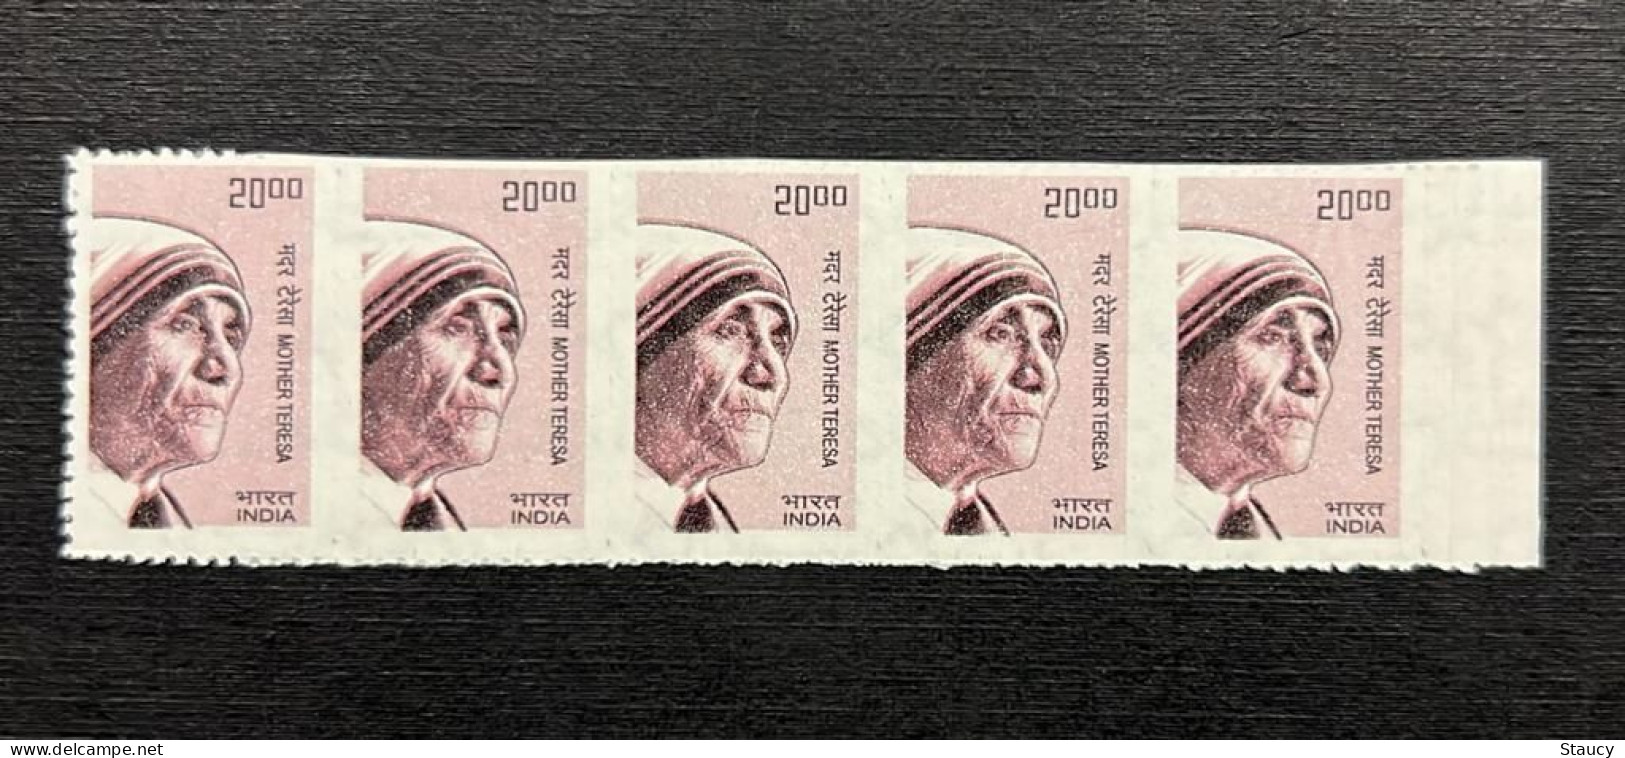 INDIA 2009 Error 10th. Definitive Series, Error "Imperf Strip Of 5 Stamps" Of "Mother Teresa" MNH As Per Scan - Mother Teresa